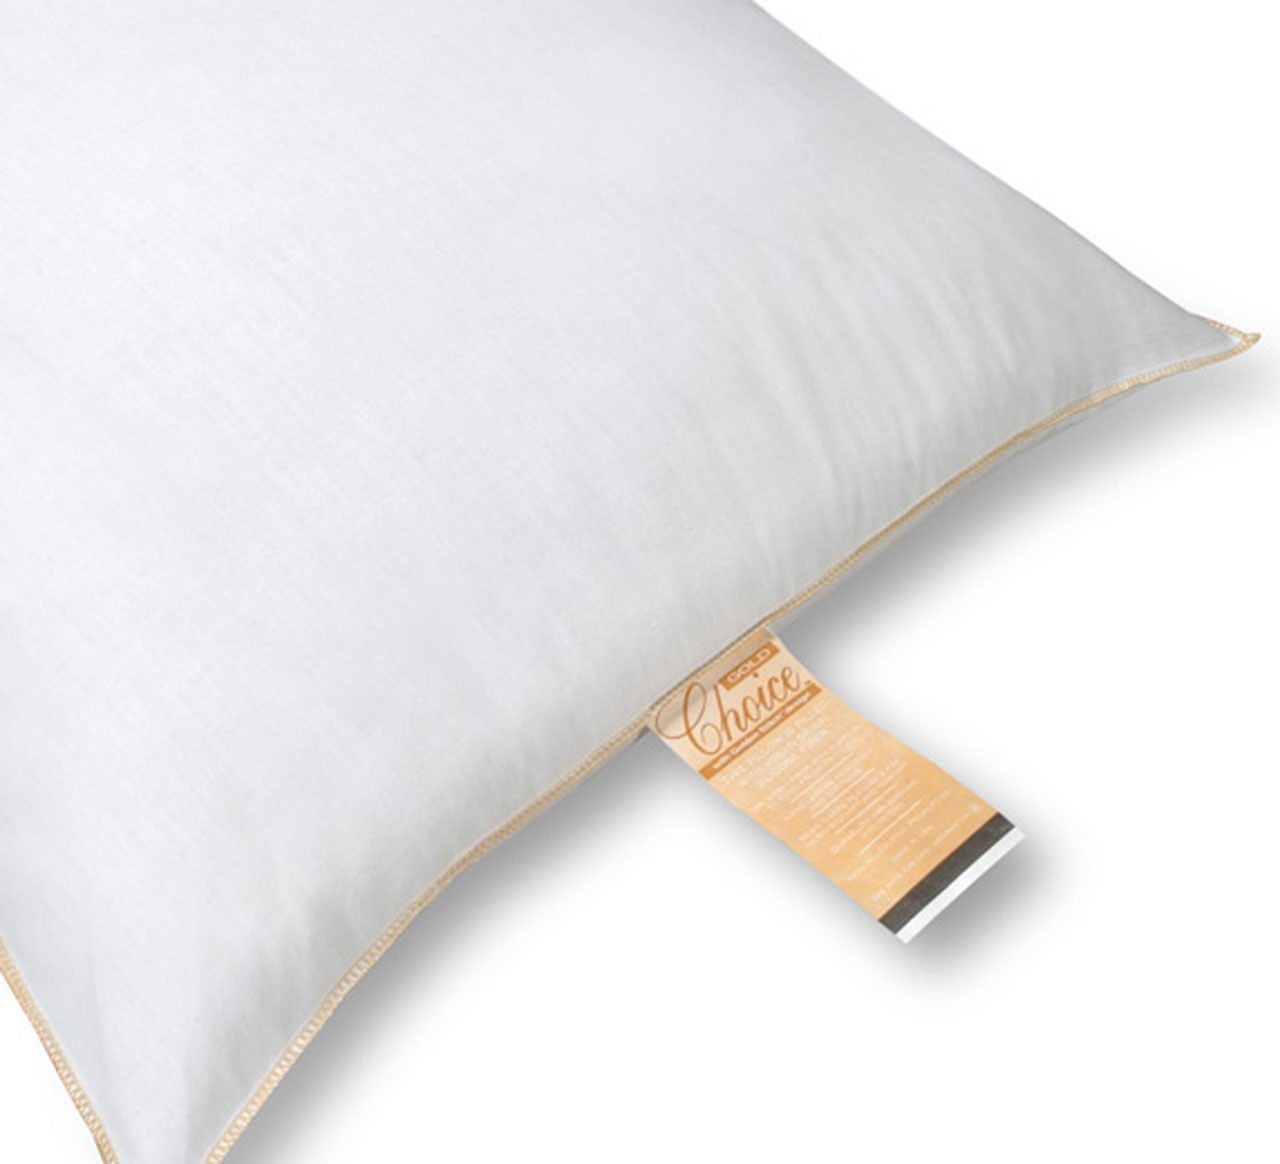 For what purpose are the Super Gold Choice Pillows specifically designed?